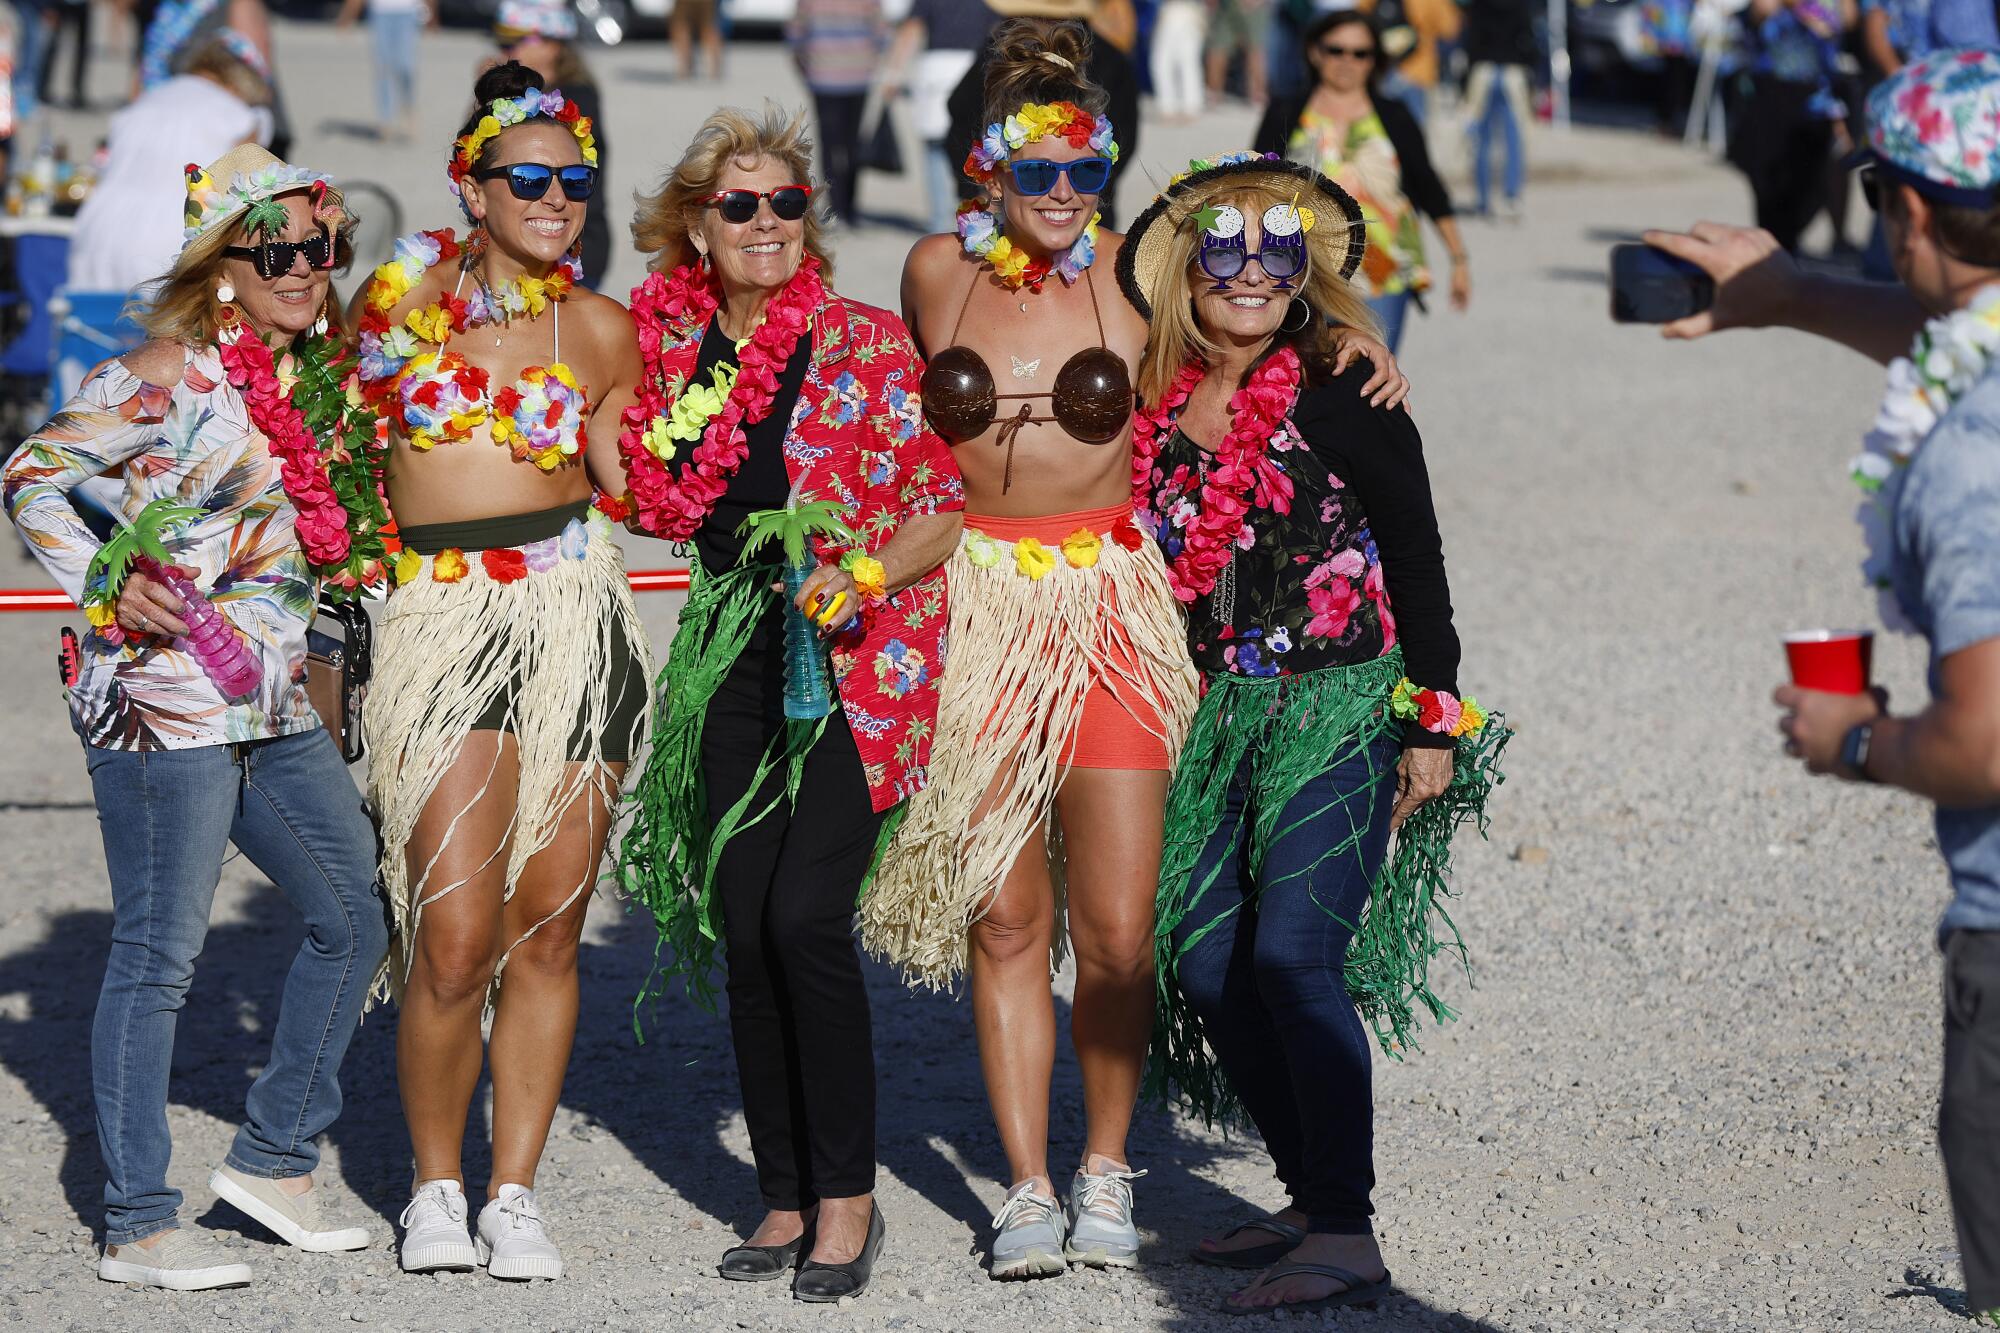 Jimmy Buffett fans take a photo in the parking lot at Snapdragon Stadium.